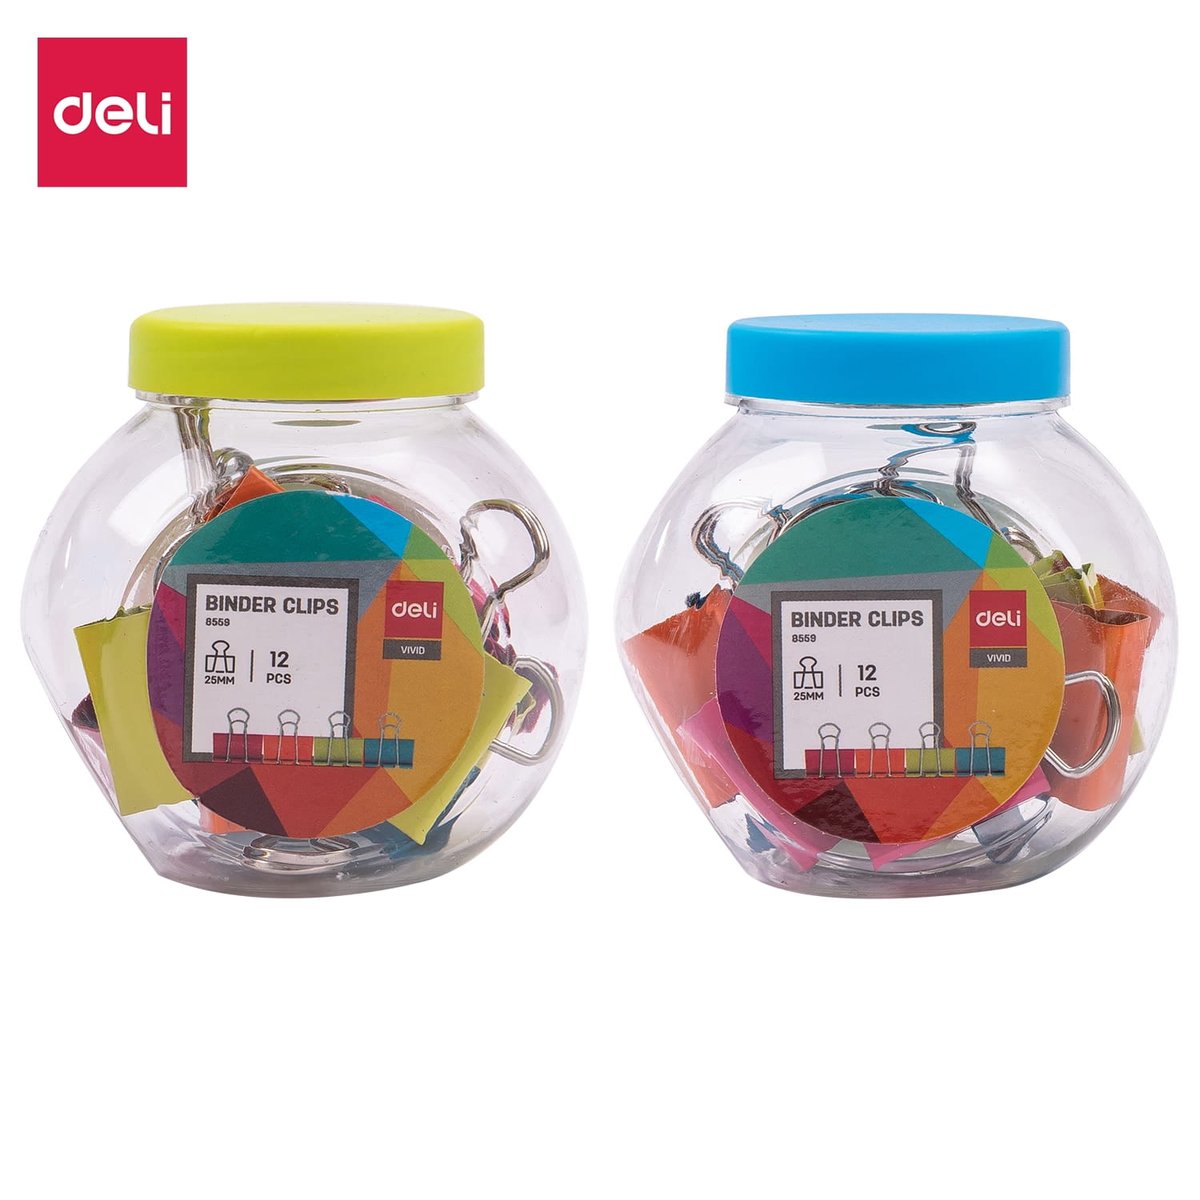 Color Binder Clips 25mm 12 Pieces In Jar 

✅ This set includes 12 clips, each measuring 25mm, and comes neatly packaged in a convenient jar.  
To know more : jmh.qa/office-supplie…
#OfficeSupplies #Colorful #BinderClips #Organization #OfficeEssentials #WorkplaceTools